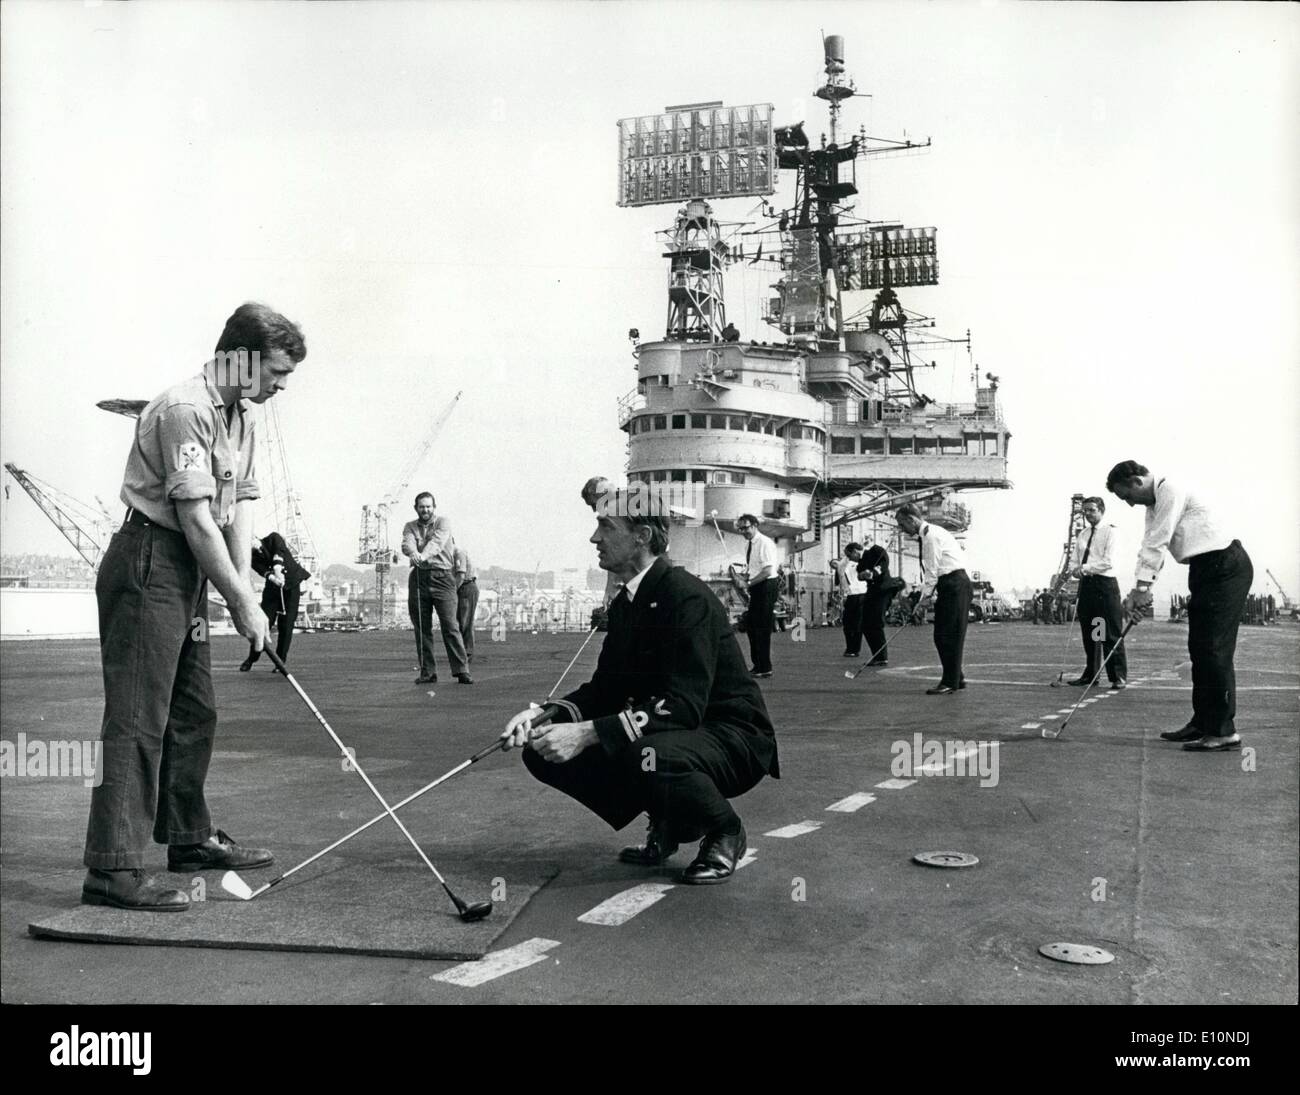 Aug. 08, 1973 - Golf on the Ark Royal: Officers in Ark Royl, the Navy's Largest aircraft carrier now in Devonport for a six-months refit, refused to admit defeat when ratings wanting to learn to play golf asked them to help. Nets were rigged to allow driving practise and back in port the flight-deck became a practice ''green''. The craze for golf swept the lower deck after programmes on the British Open were televised during the carrier's recent Commission Stock Photo